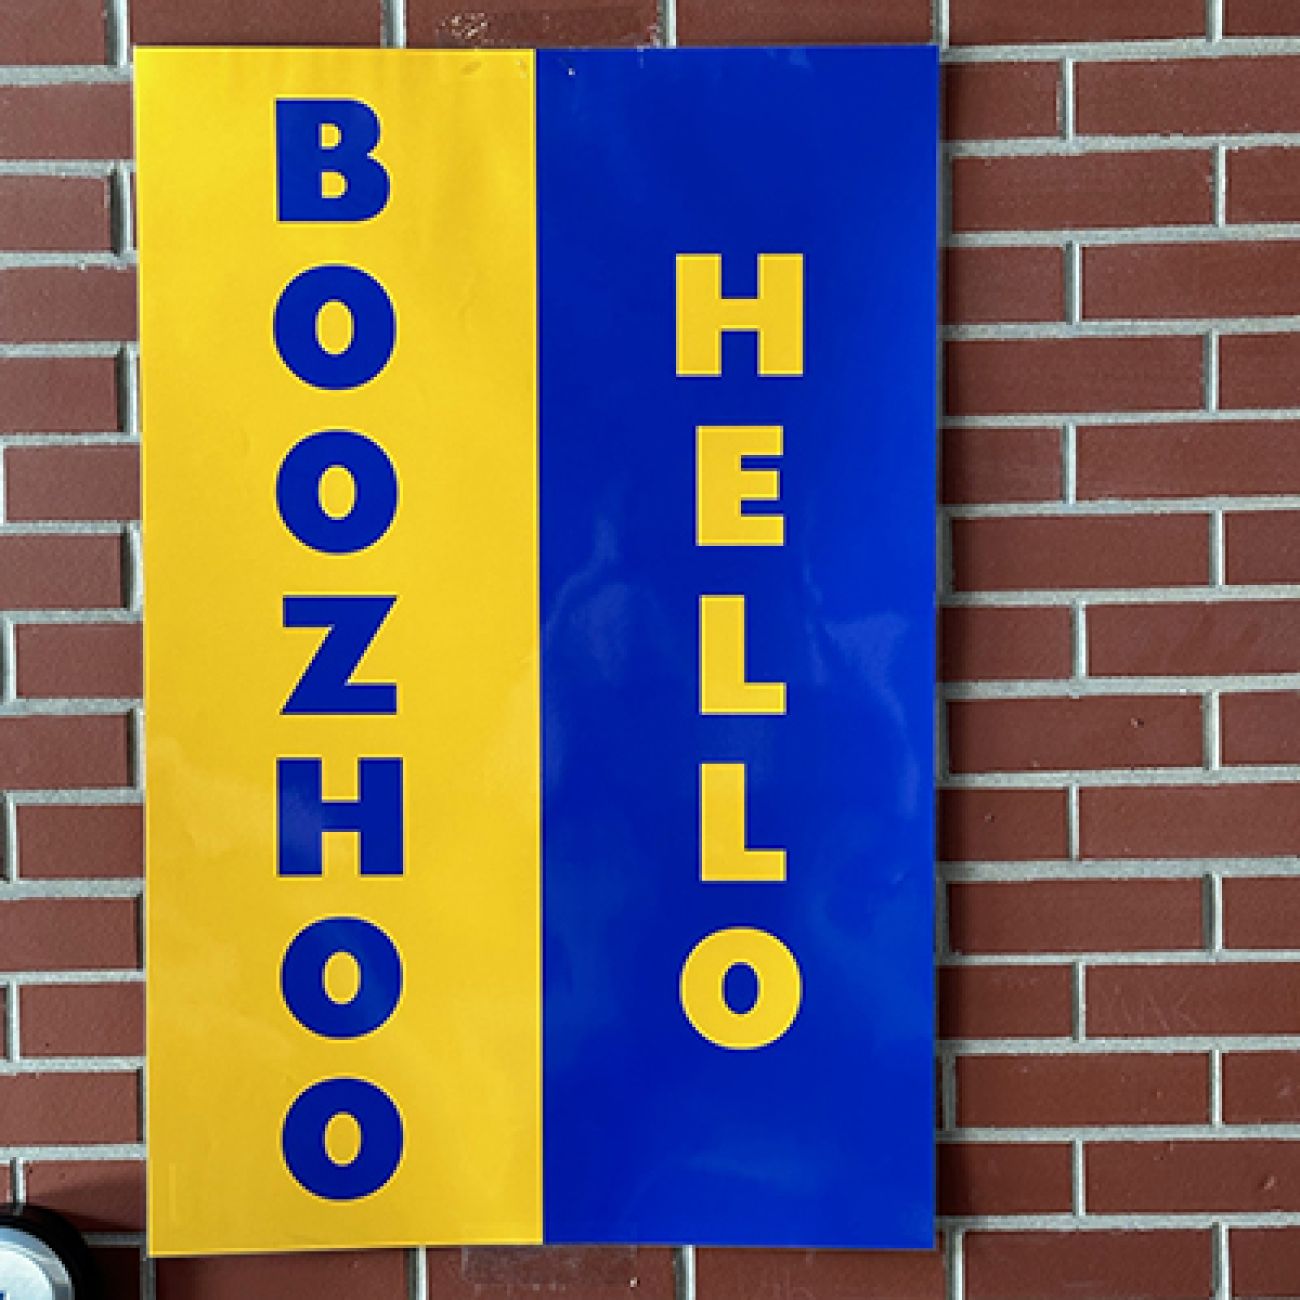 a sign that says bozohoo on the left and hello on the right